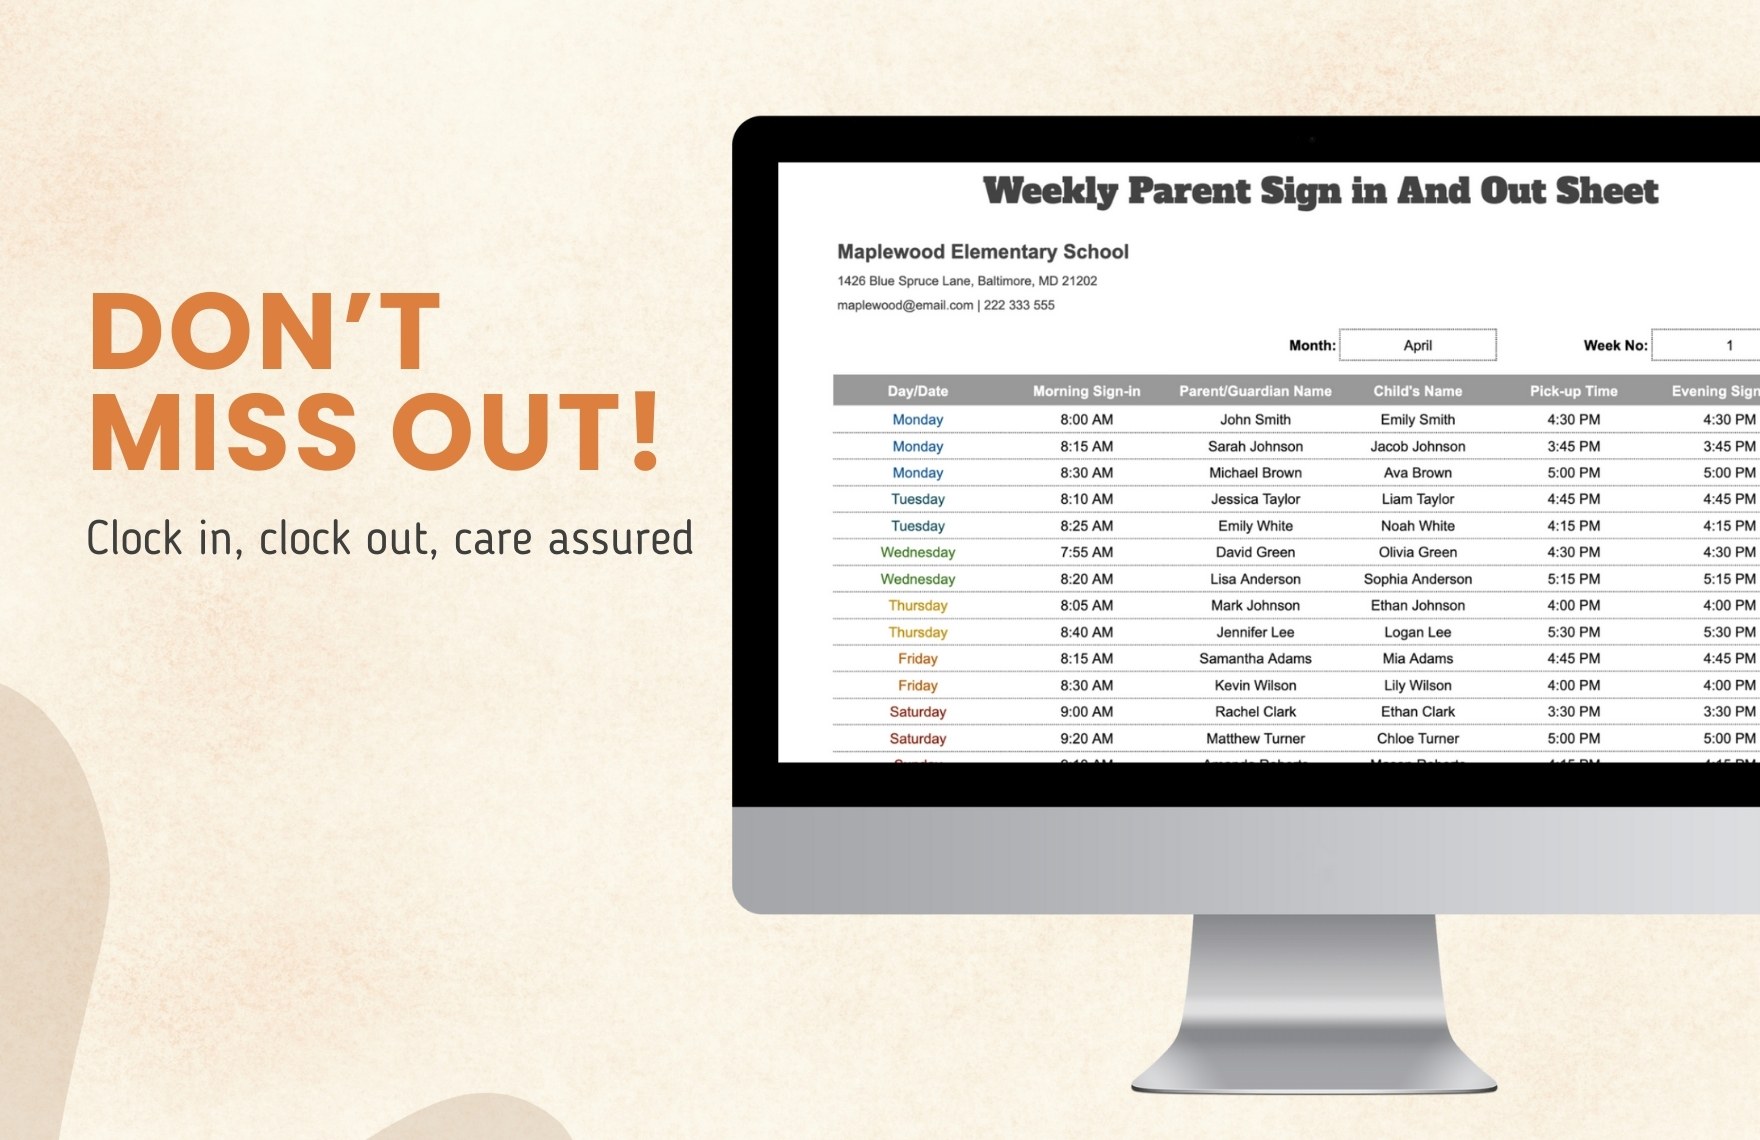 Weekly Parent Sign in And Out Sheet Template